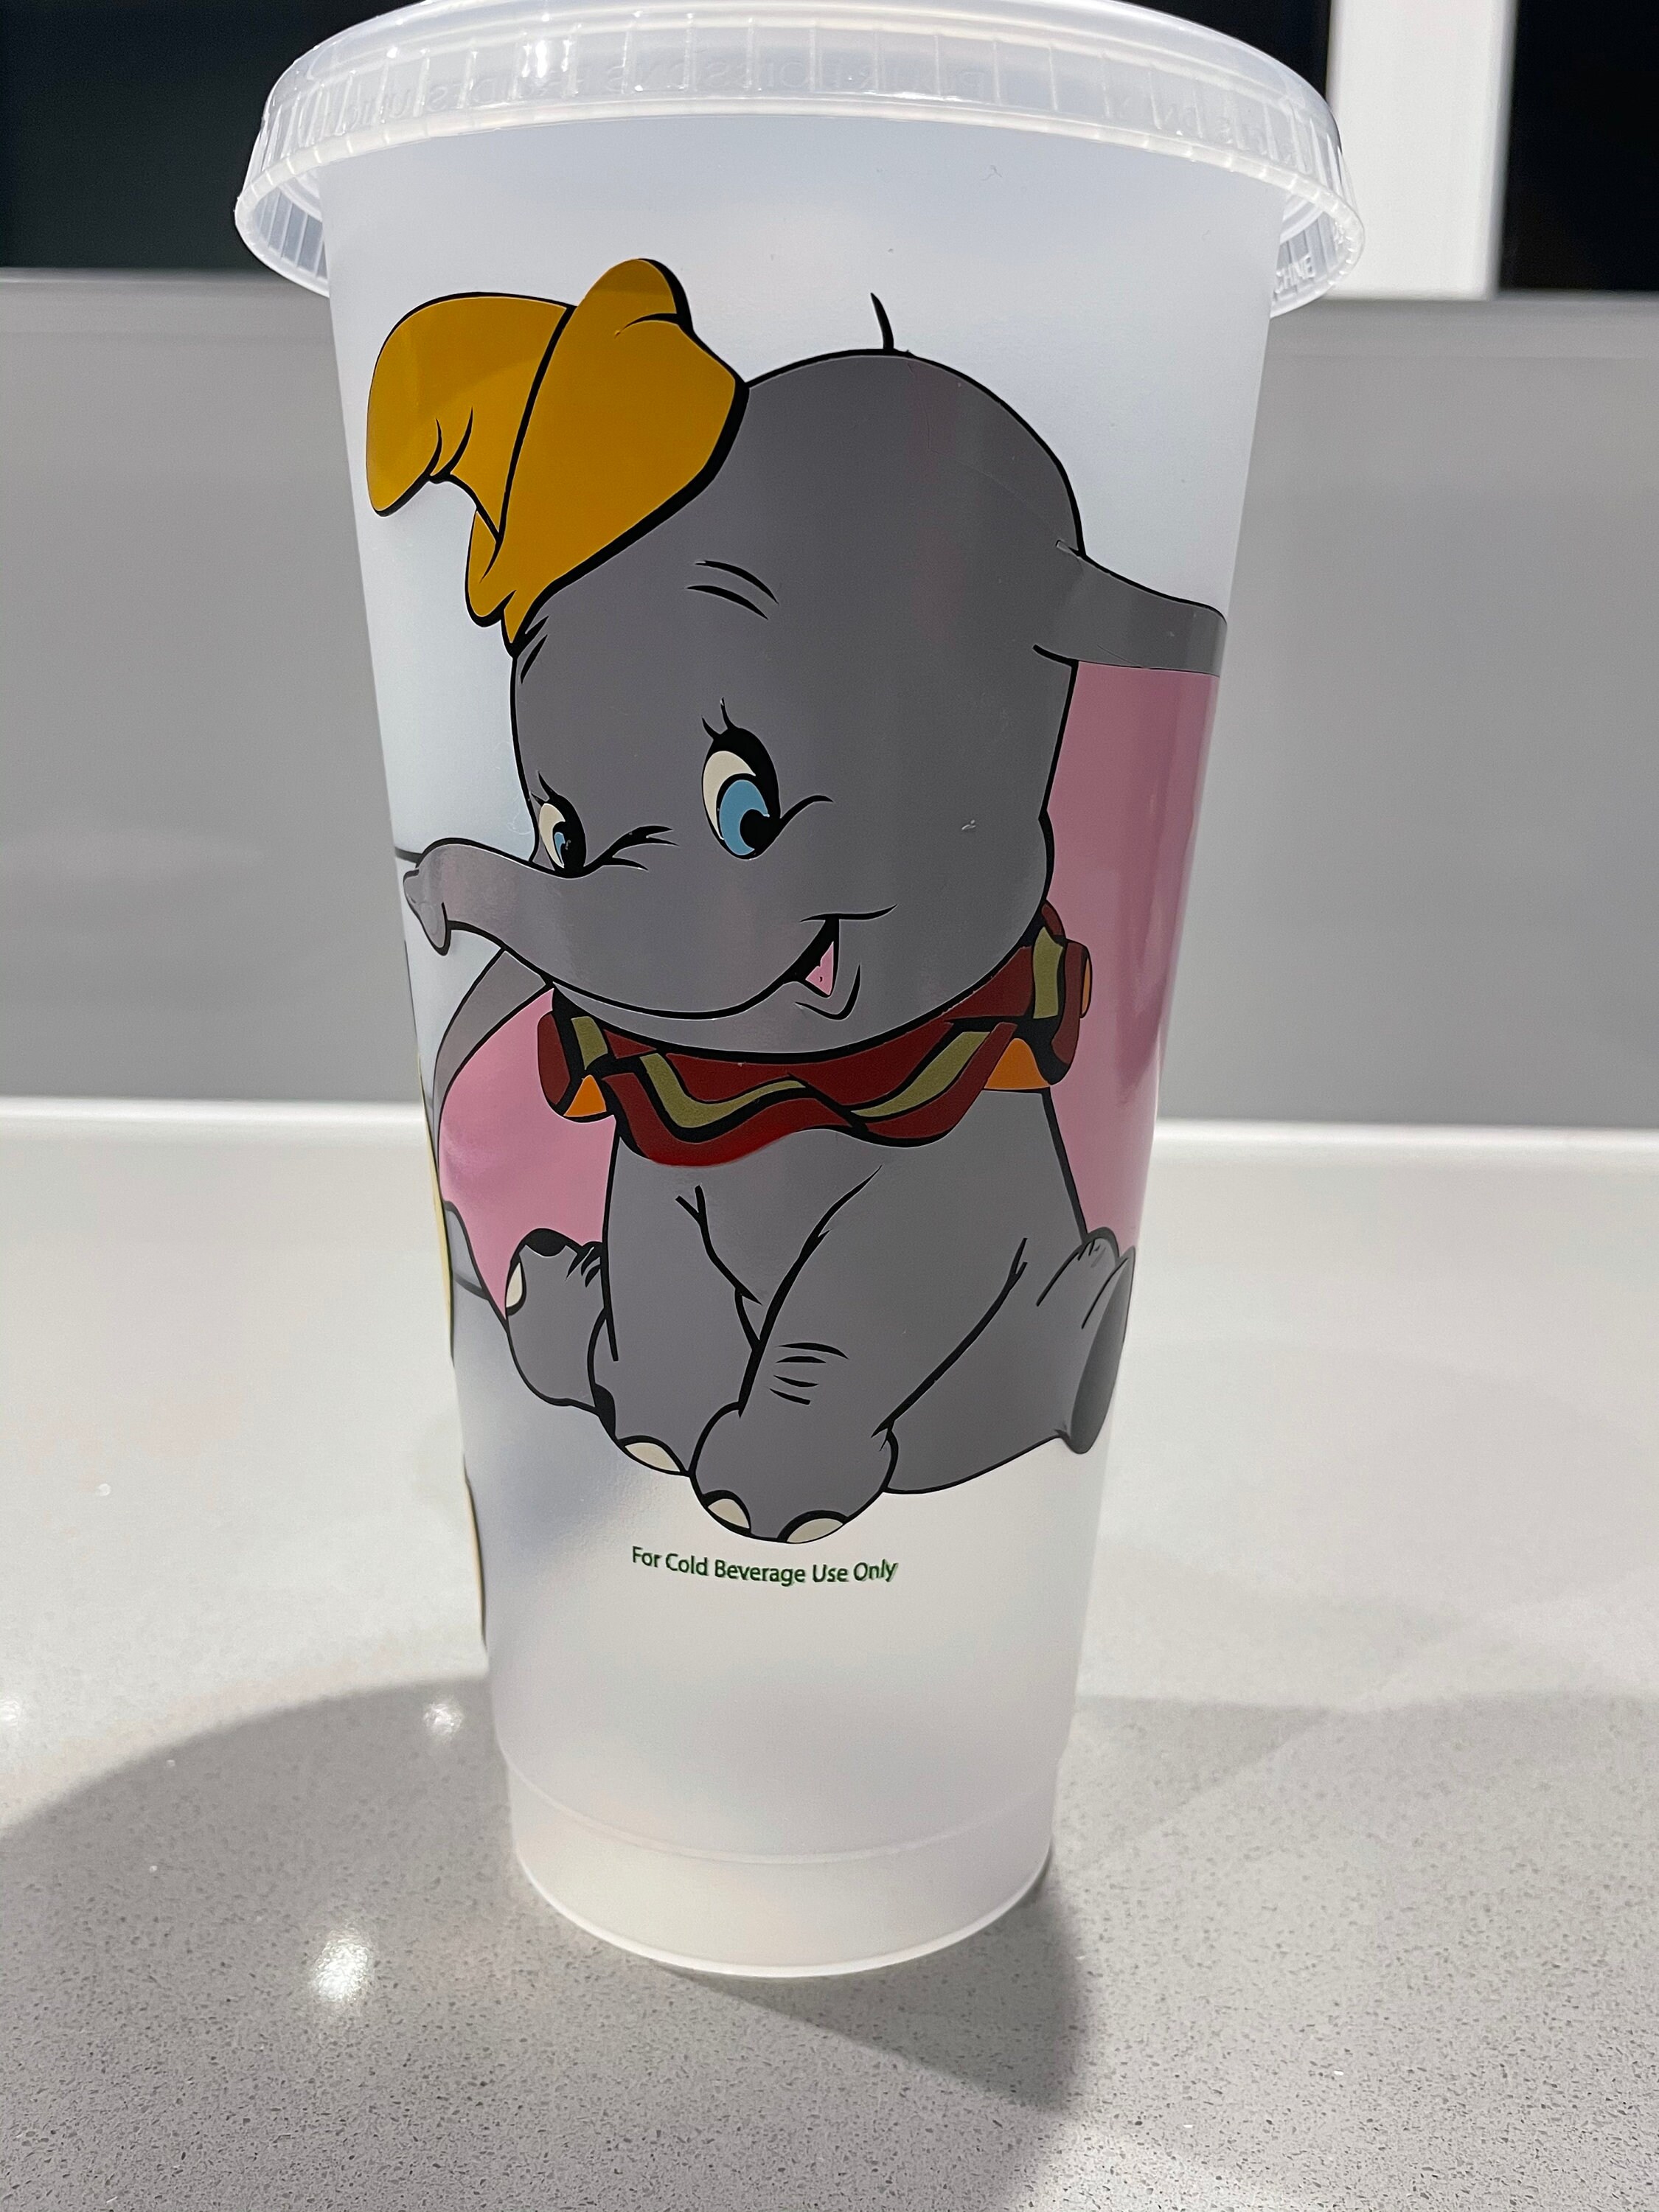 Disney Inspired Dumbo the Flying Elephant Starbucks Cup Personalized Starbucks Tumbler Yours Truly Ashlyn/ Reusable Starbucks Cold Cup